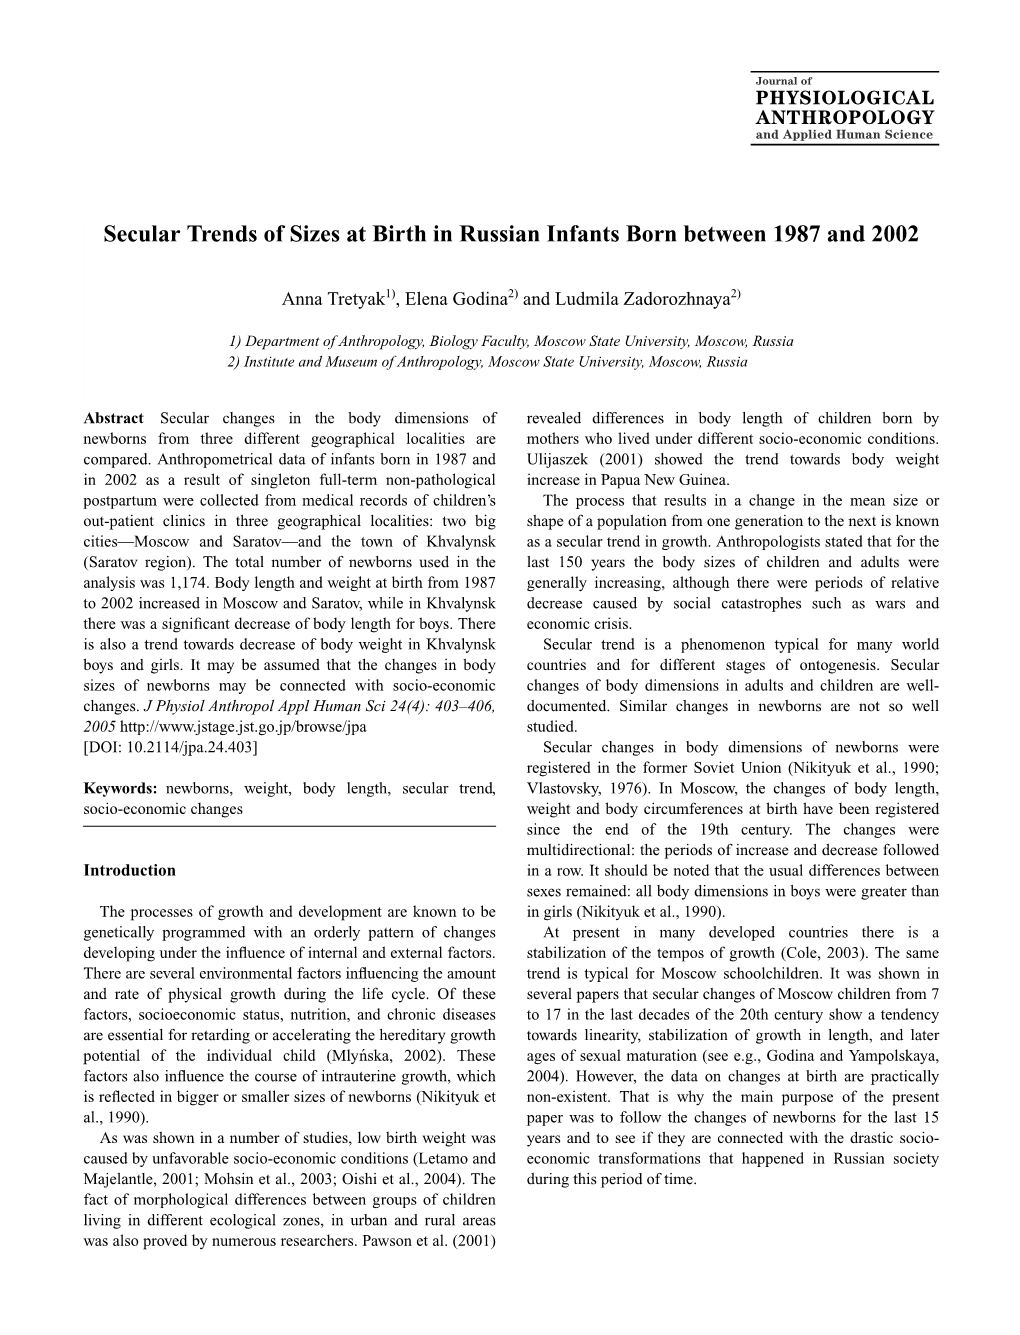 Secular Trends of Sizes at Birth in Russian Infants Born Between 1987 and 2002